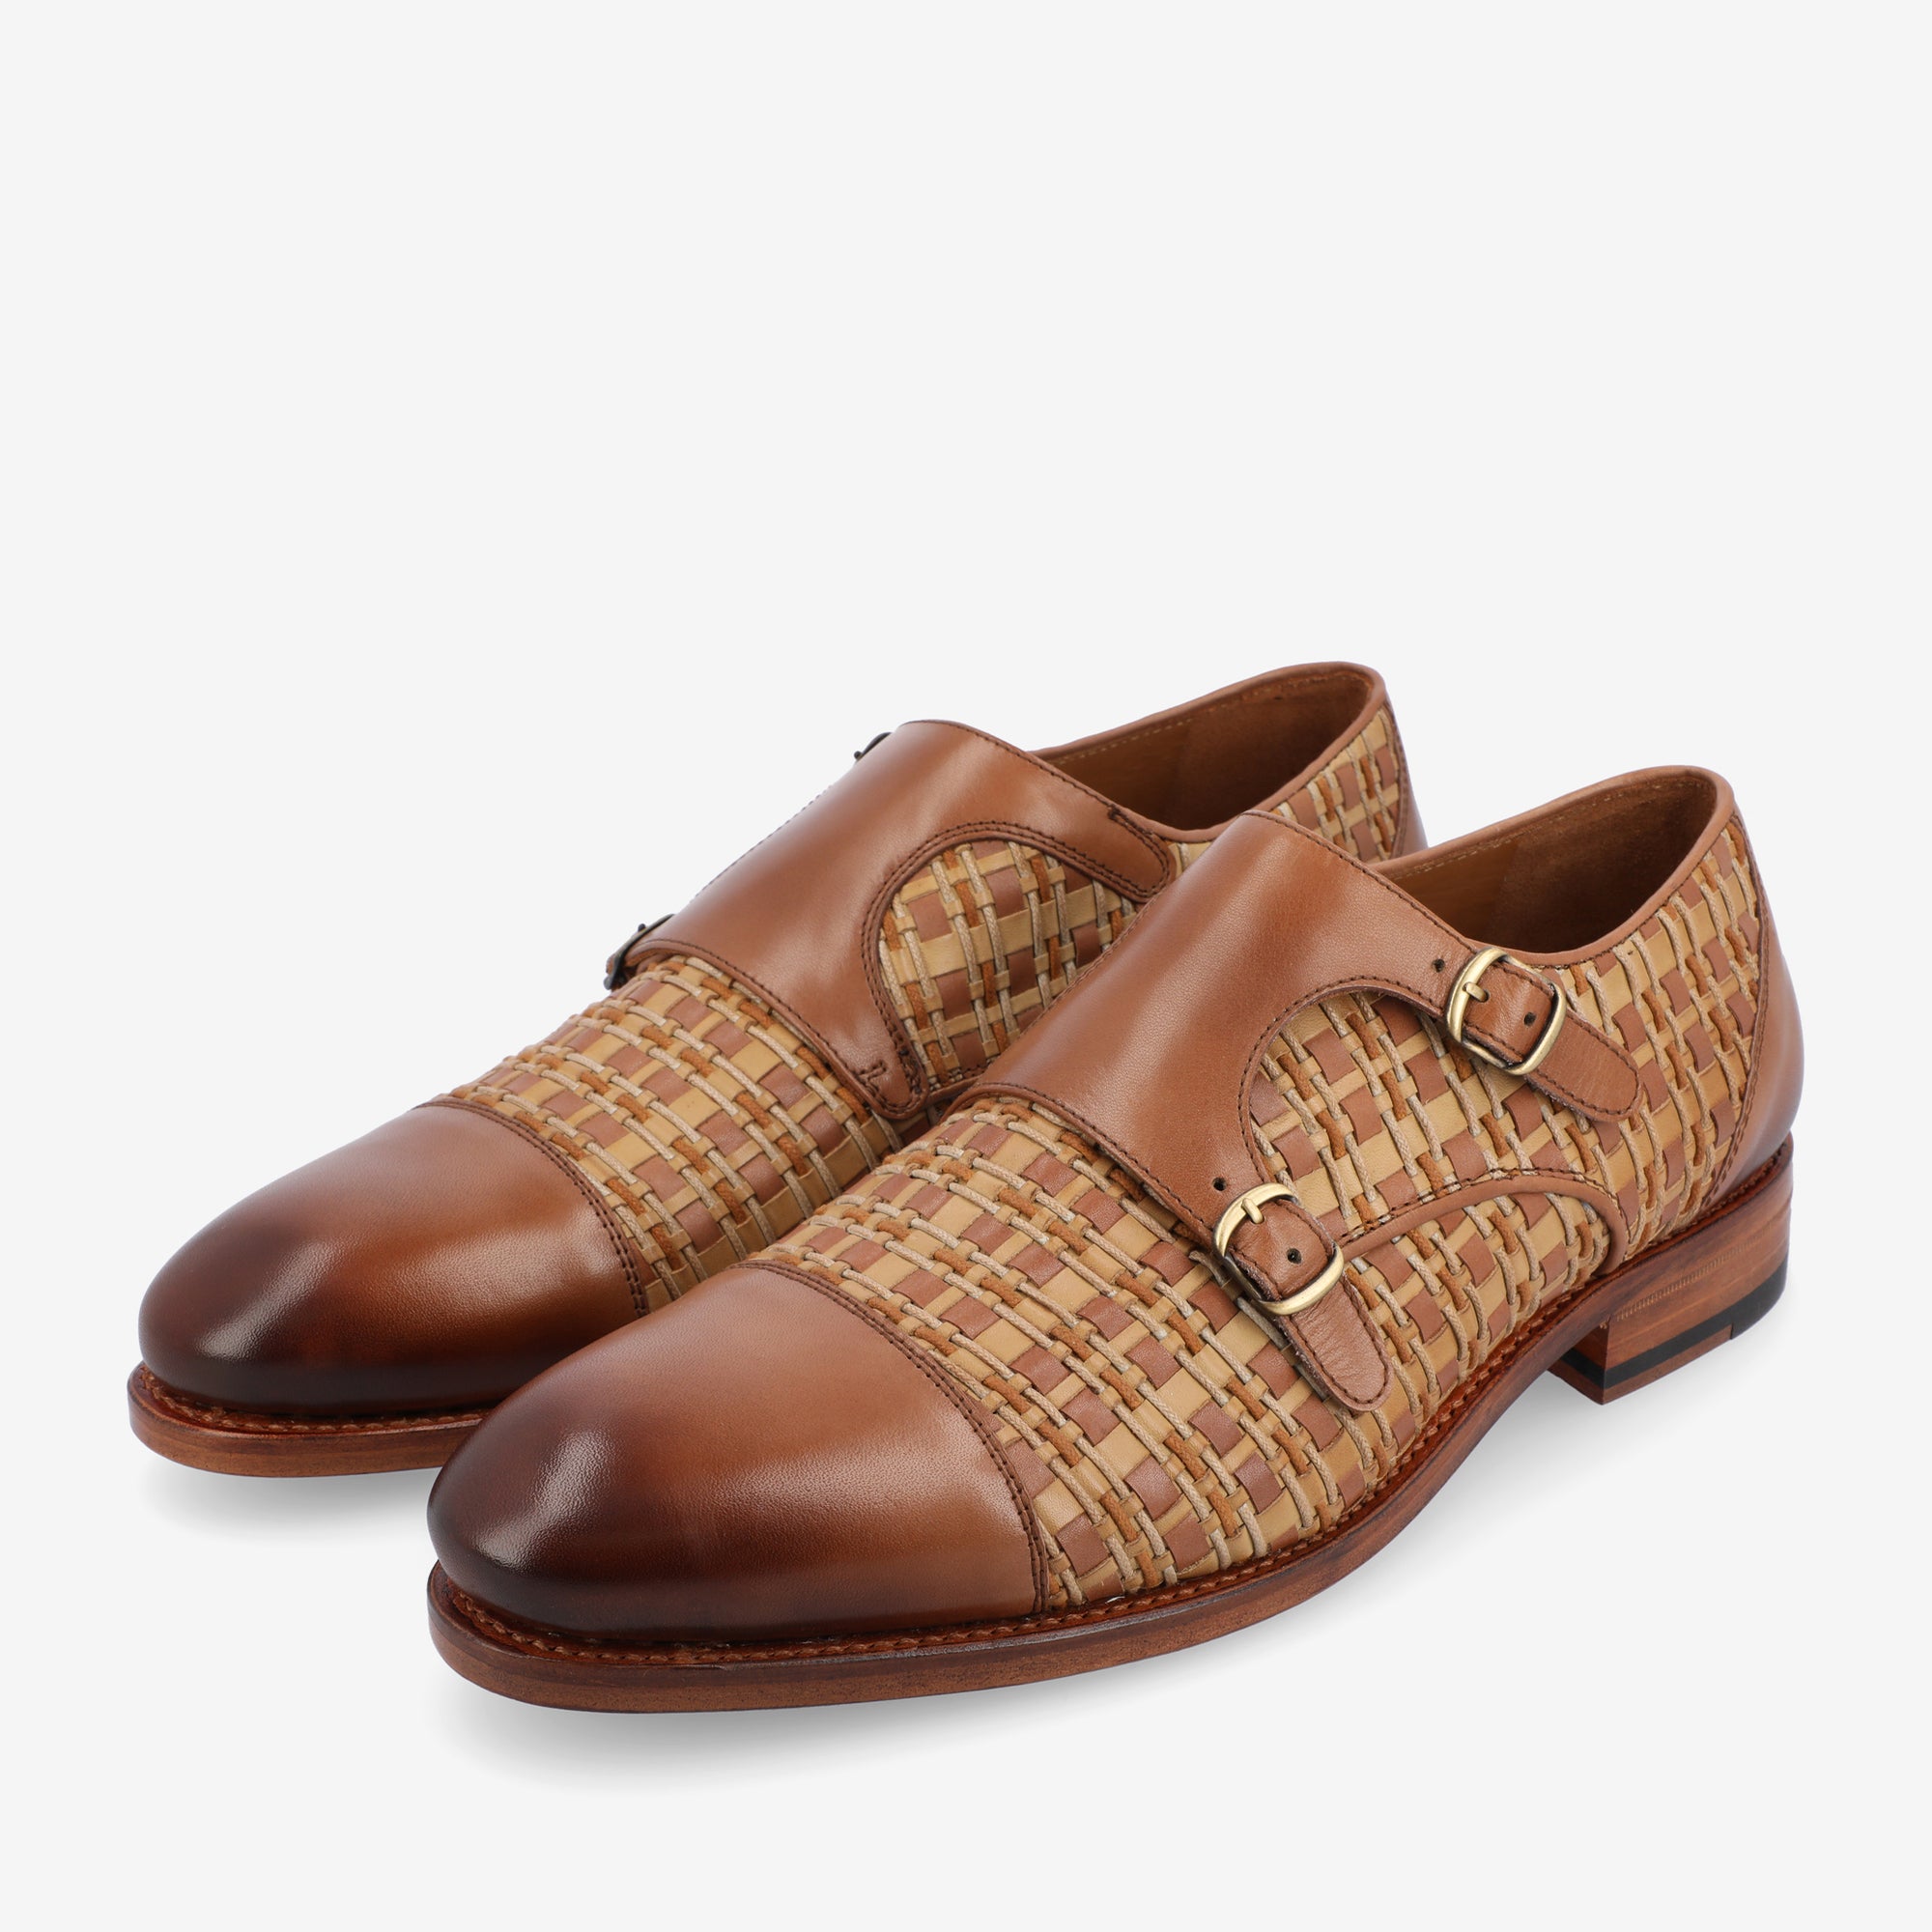 The Lucca Monk in Brown Woven